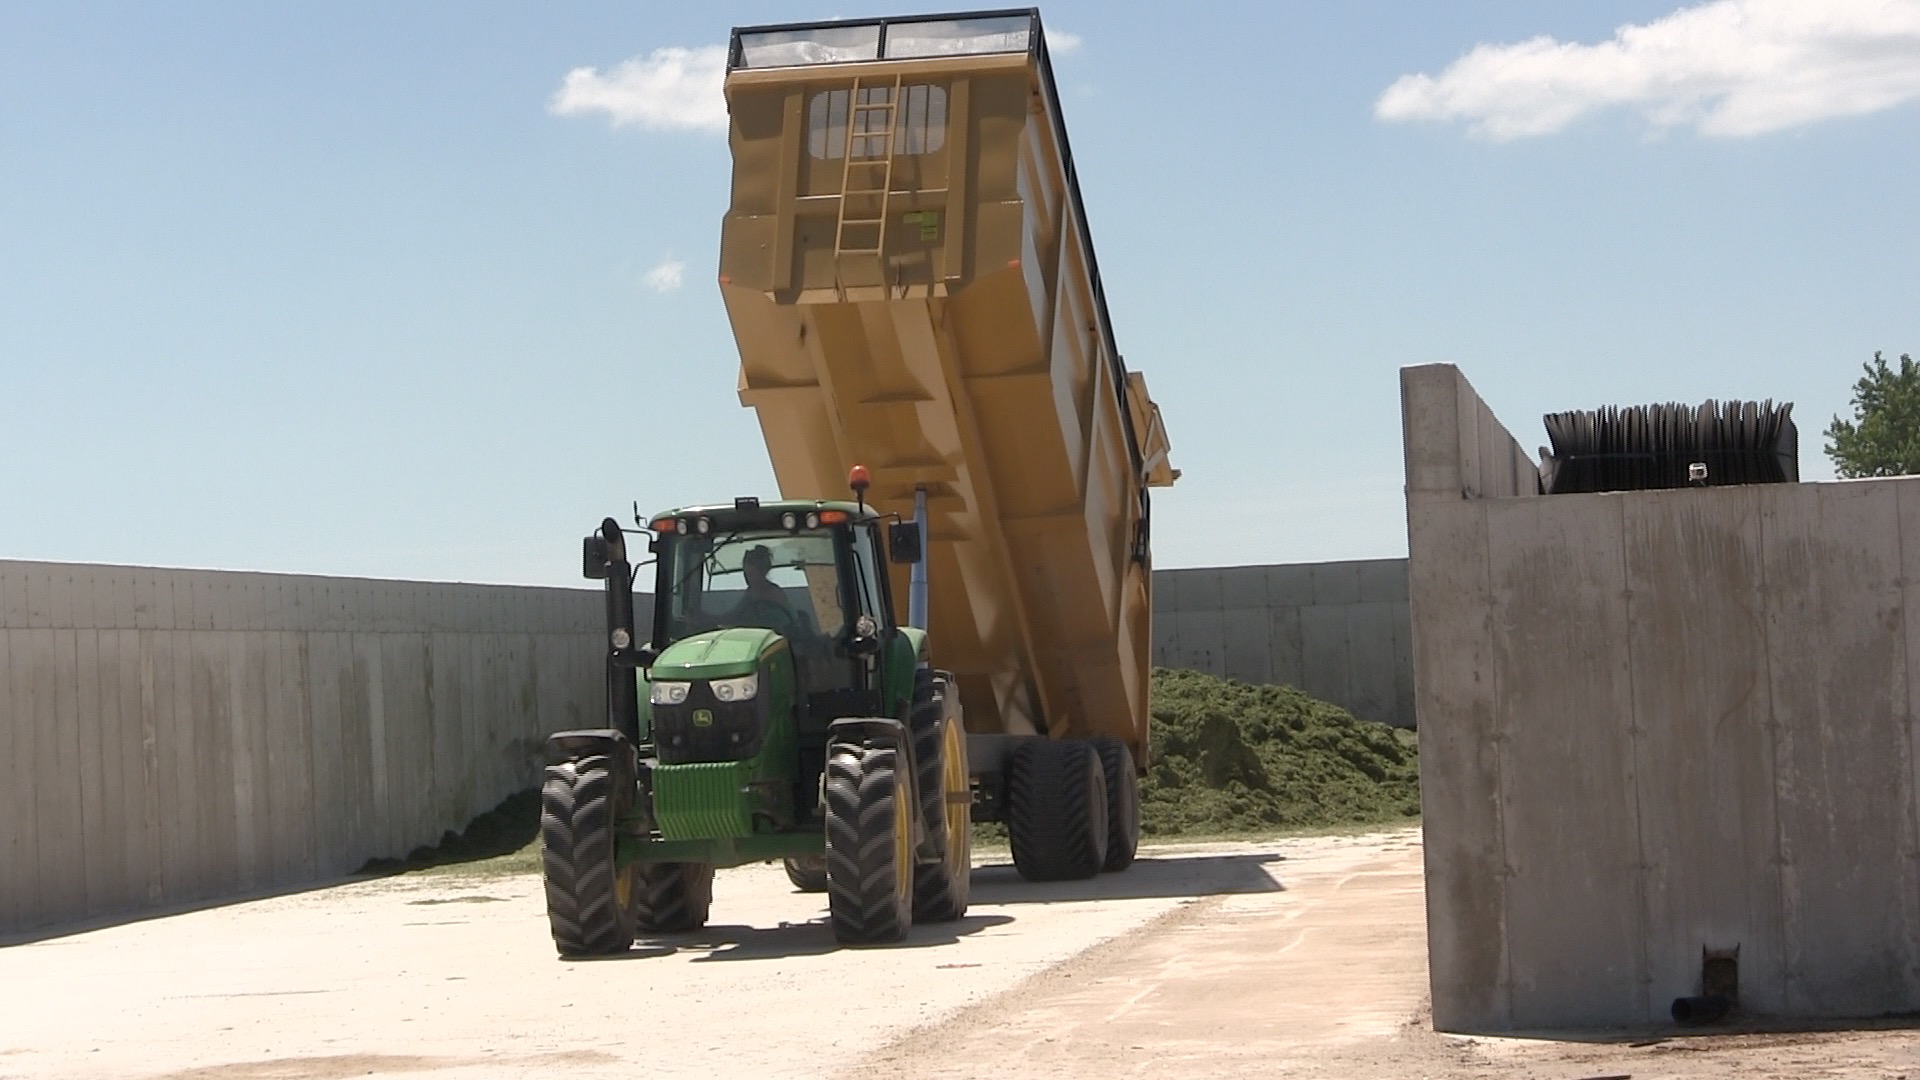 An image of the 20 ton silage dumper trailer lifted up